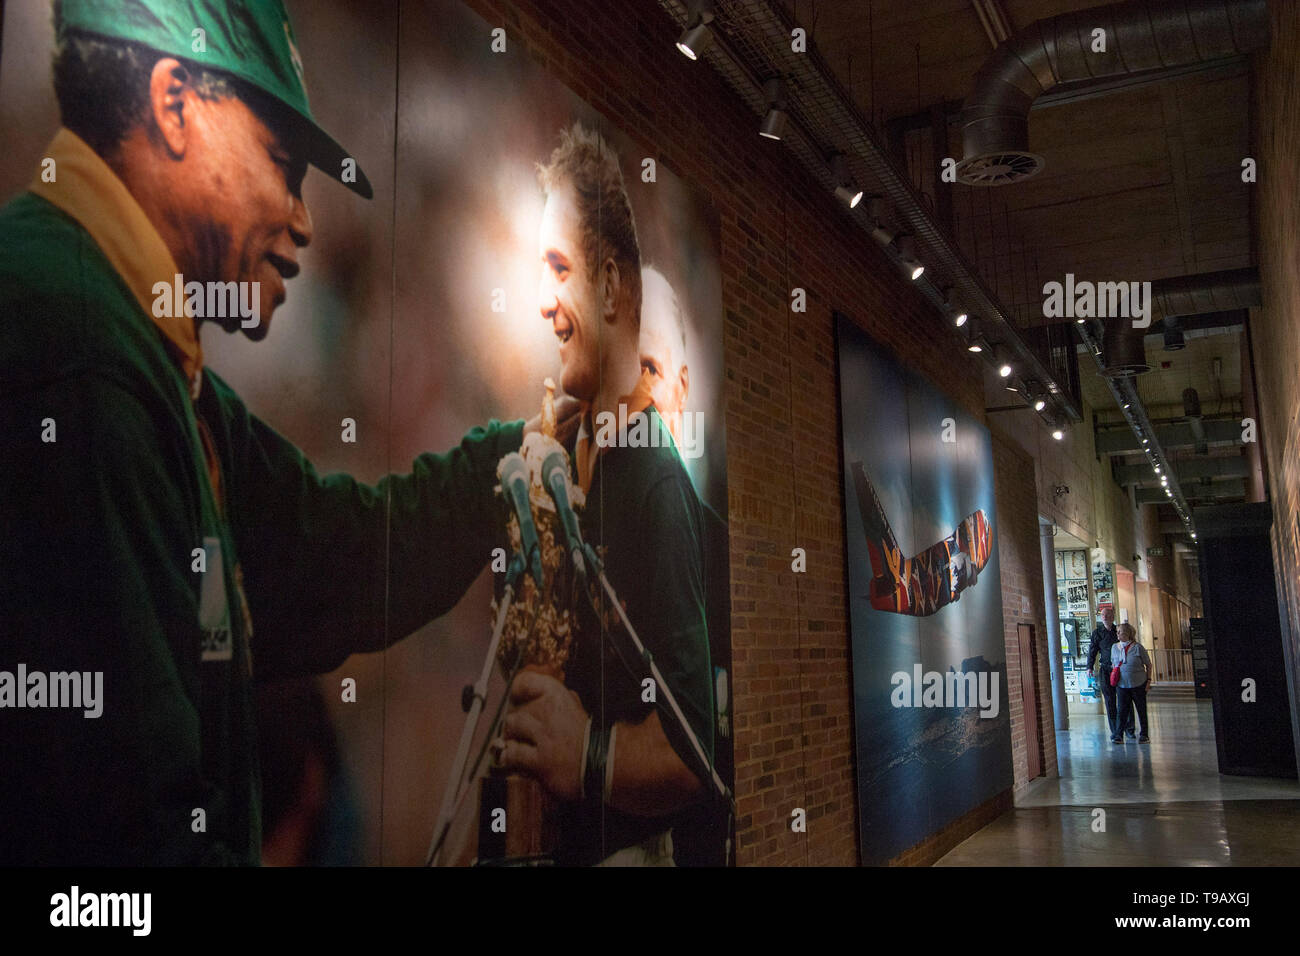 Beijing, South Africa. 17th May, 2019. People visit the Apartheid Museum in Johannesburg, South Africa, May 17, 2019. The Apartheid Museum opens a window into South Africa's past struggle with colonial domination, injustices and racial segregation while spotlighting the dawn of an independence era marked with racial integration and just rule. May 18 marks the International Museum Day. Credit: Chen Cheng/Xinhua/Alamy Live News Stock Photo